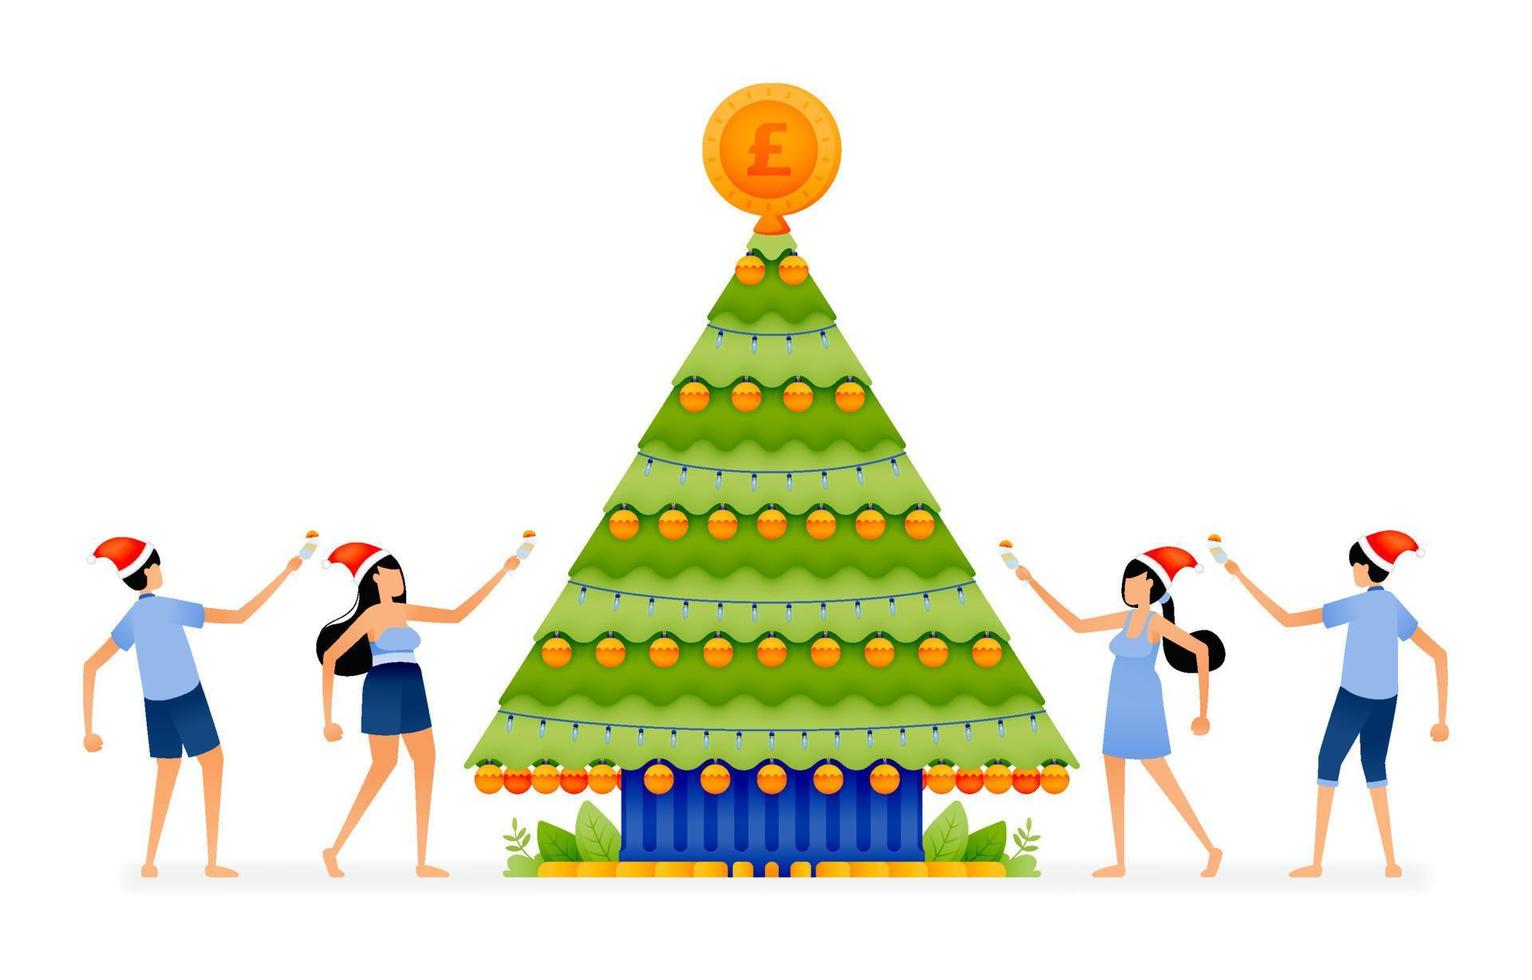 People toast and party around a christmas tree decorated with lights and dollar bills. Designed for website, landing page, flyer, banner, apps, brochure, startup media company vector